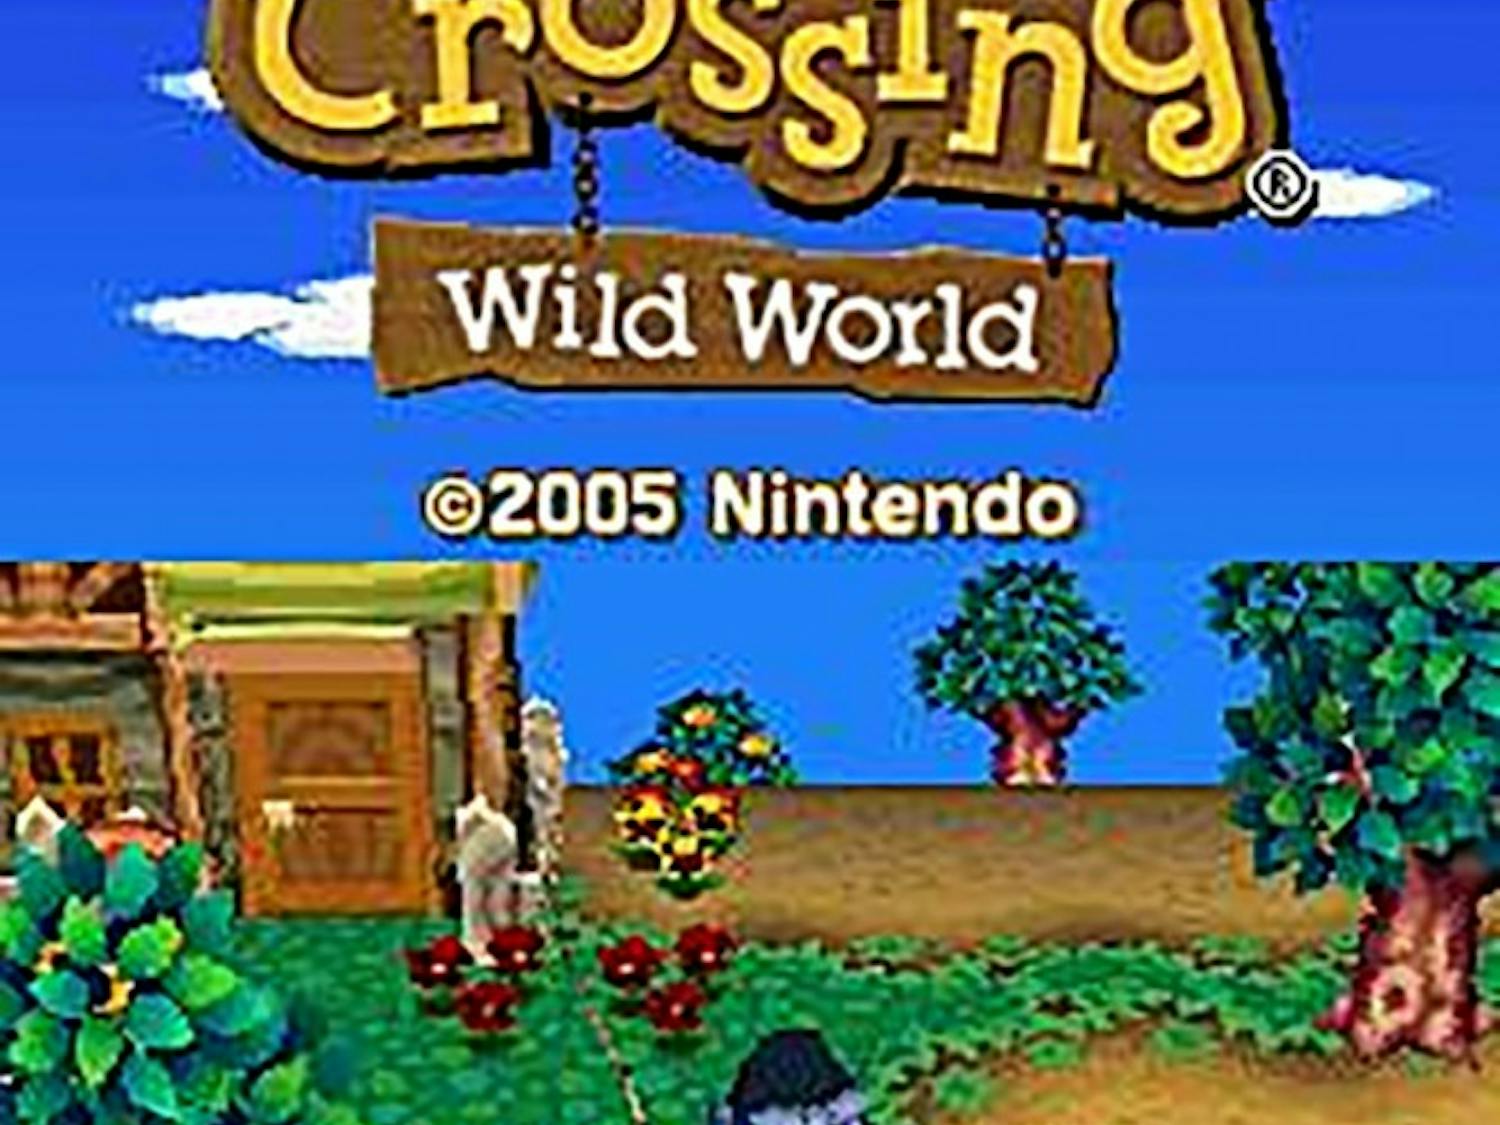 "Animal Crossing: Wild World" introduced kids to their future: debt, fledgling friendships and endless menial jobs. But it also revealed having fun despite these adult hardships.